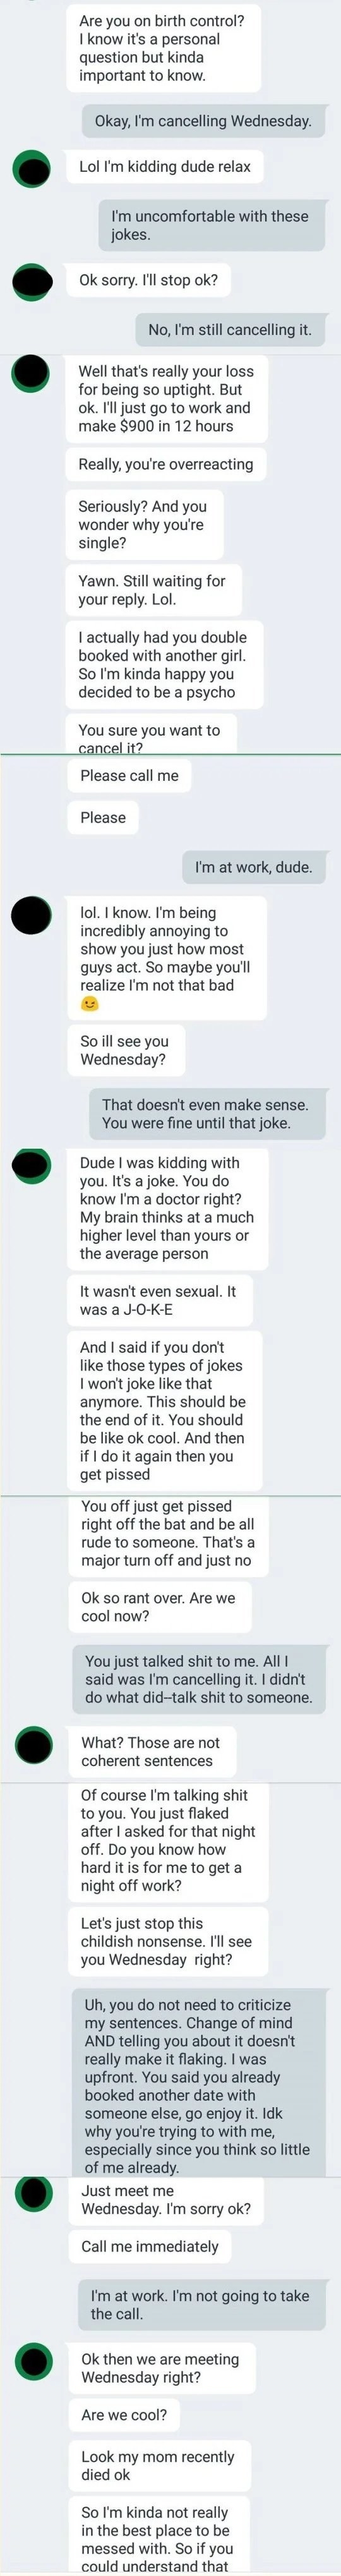 The man asks if the woman is on birth control, she responds by canceling their date, he claims to have double booked her with another date anyway, then continues asking her to go out with him and when she doesn&#x27;t respond, he says his mom died